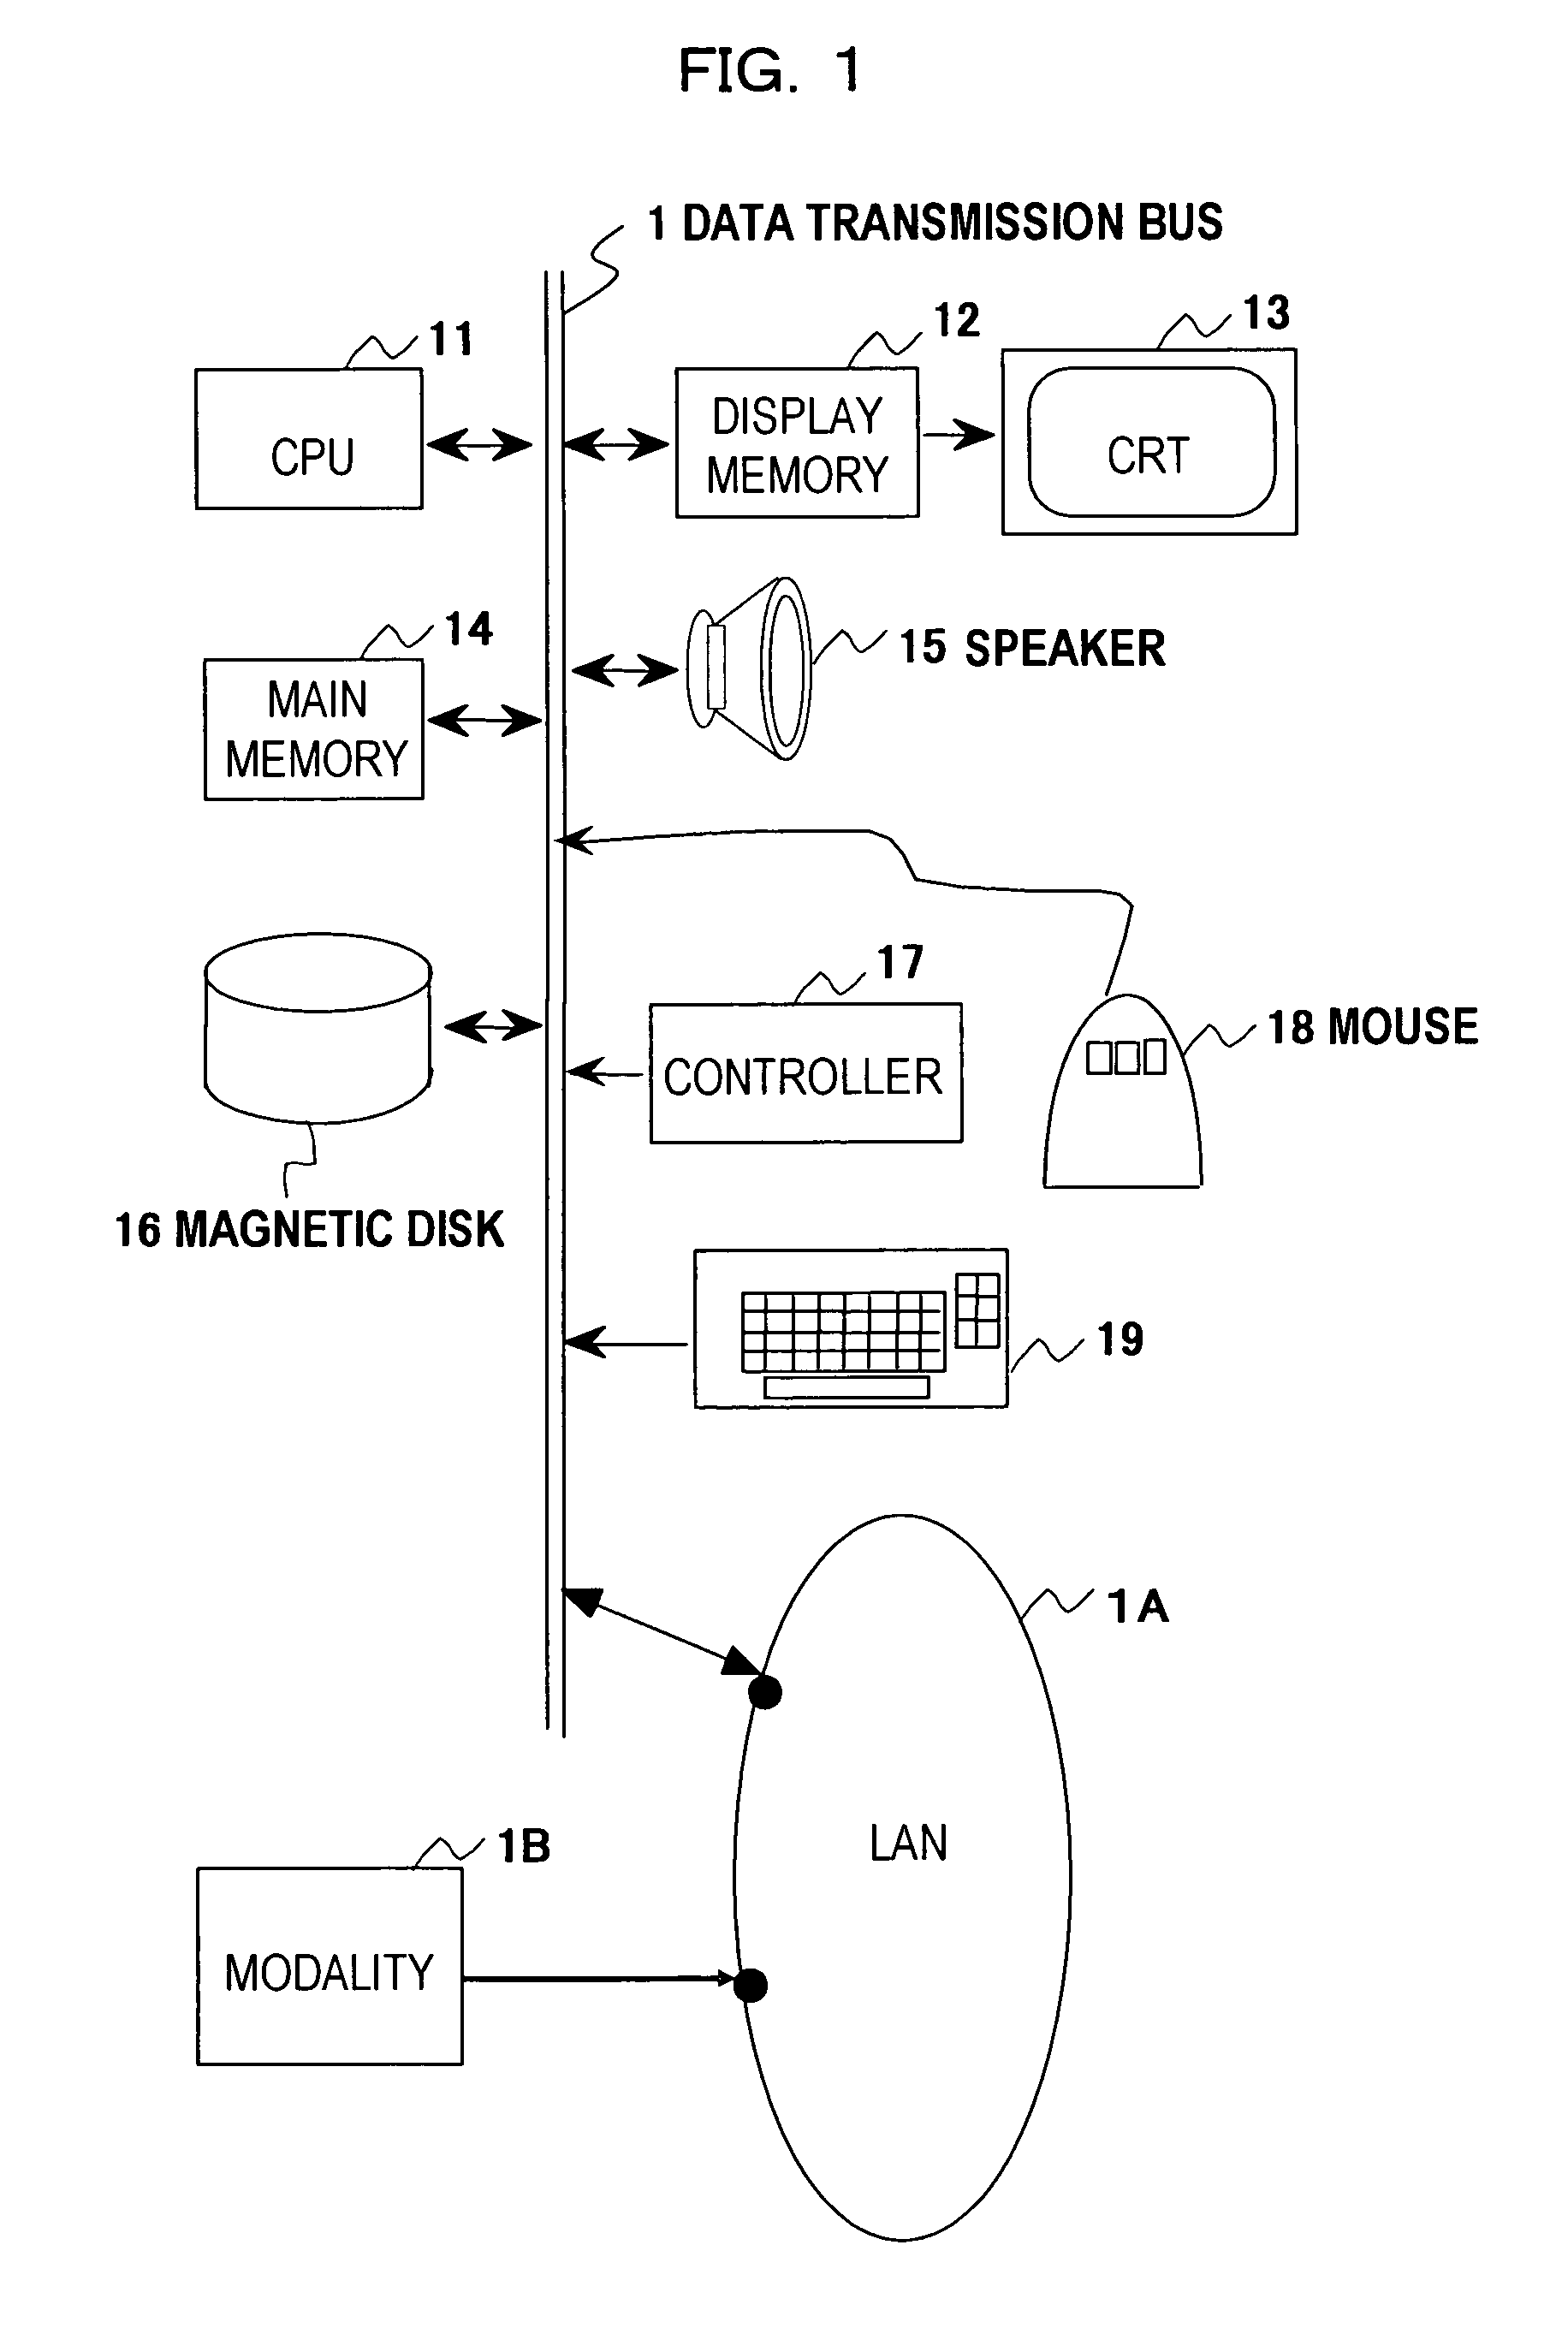 Medical image diagnosis support device and method for calculating degree of deformation from normal shapes of organ regions